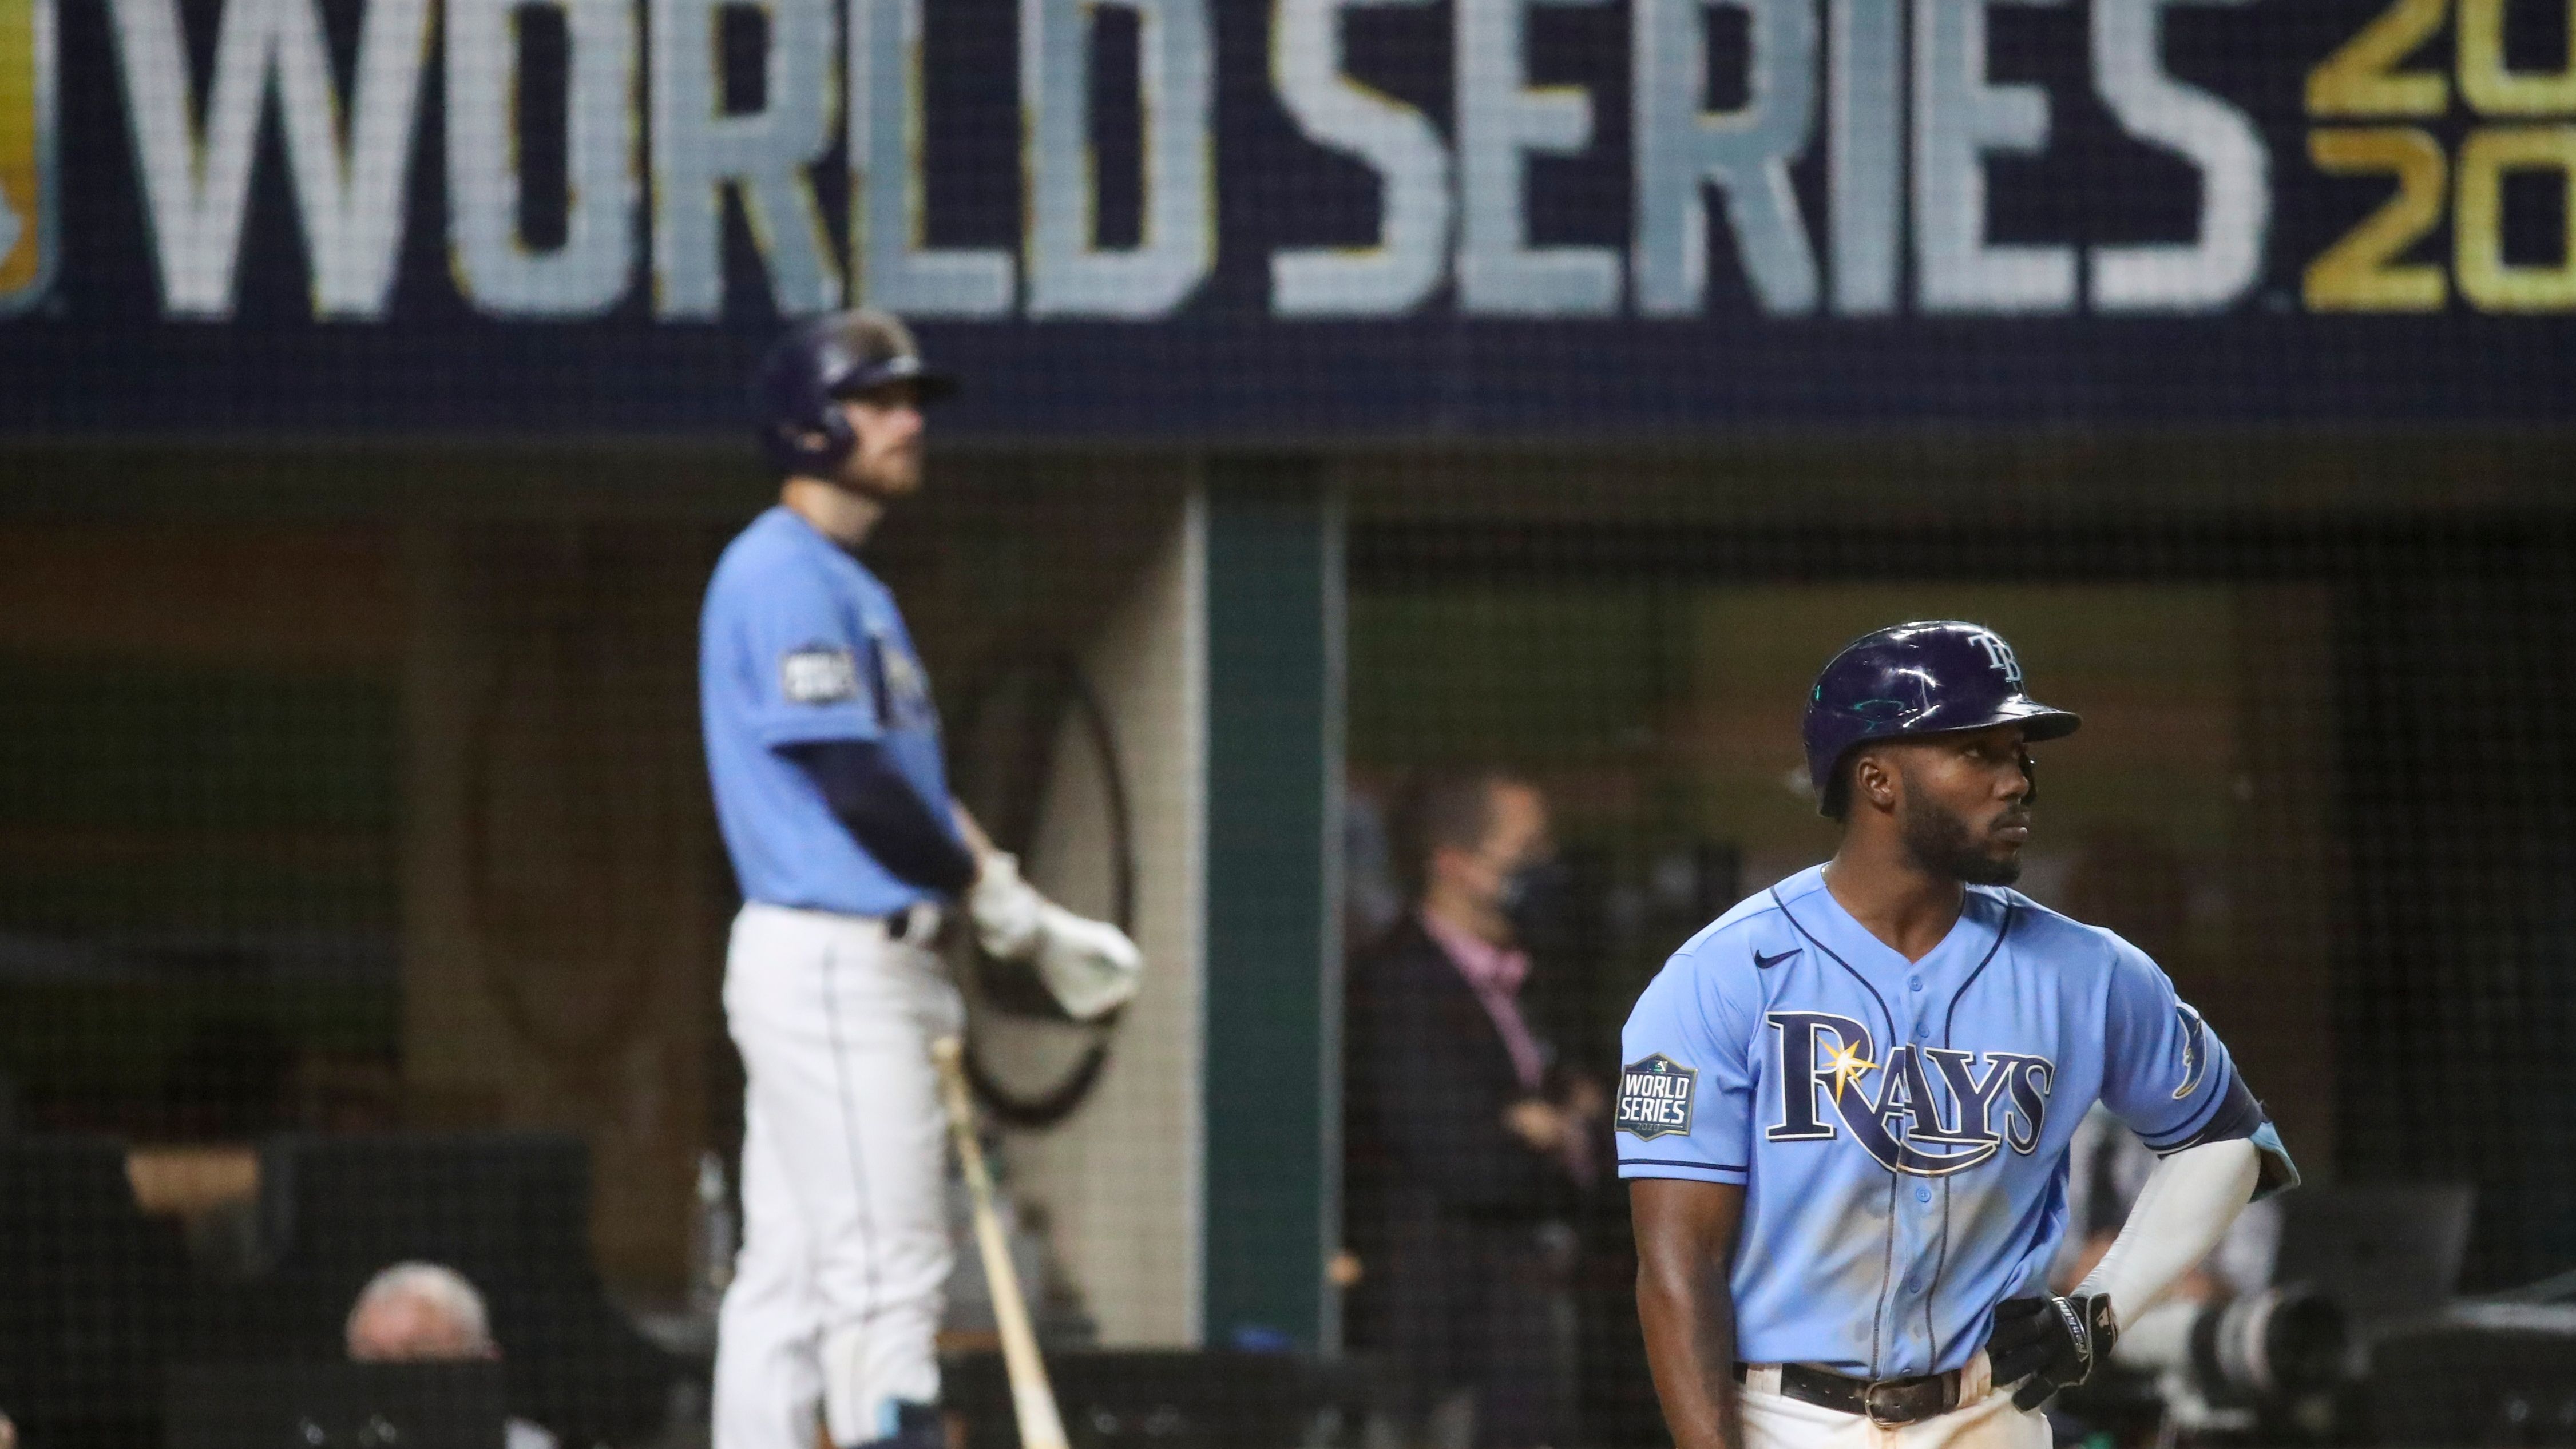 The three young players who may determine Rays' 2021 fate